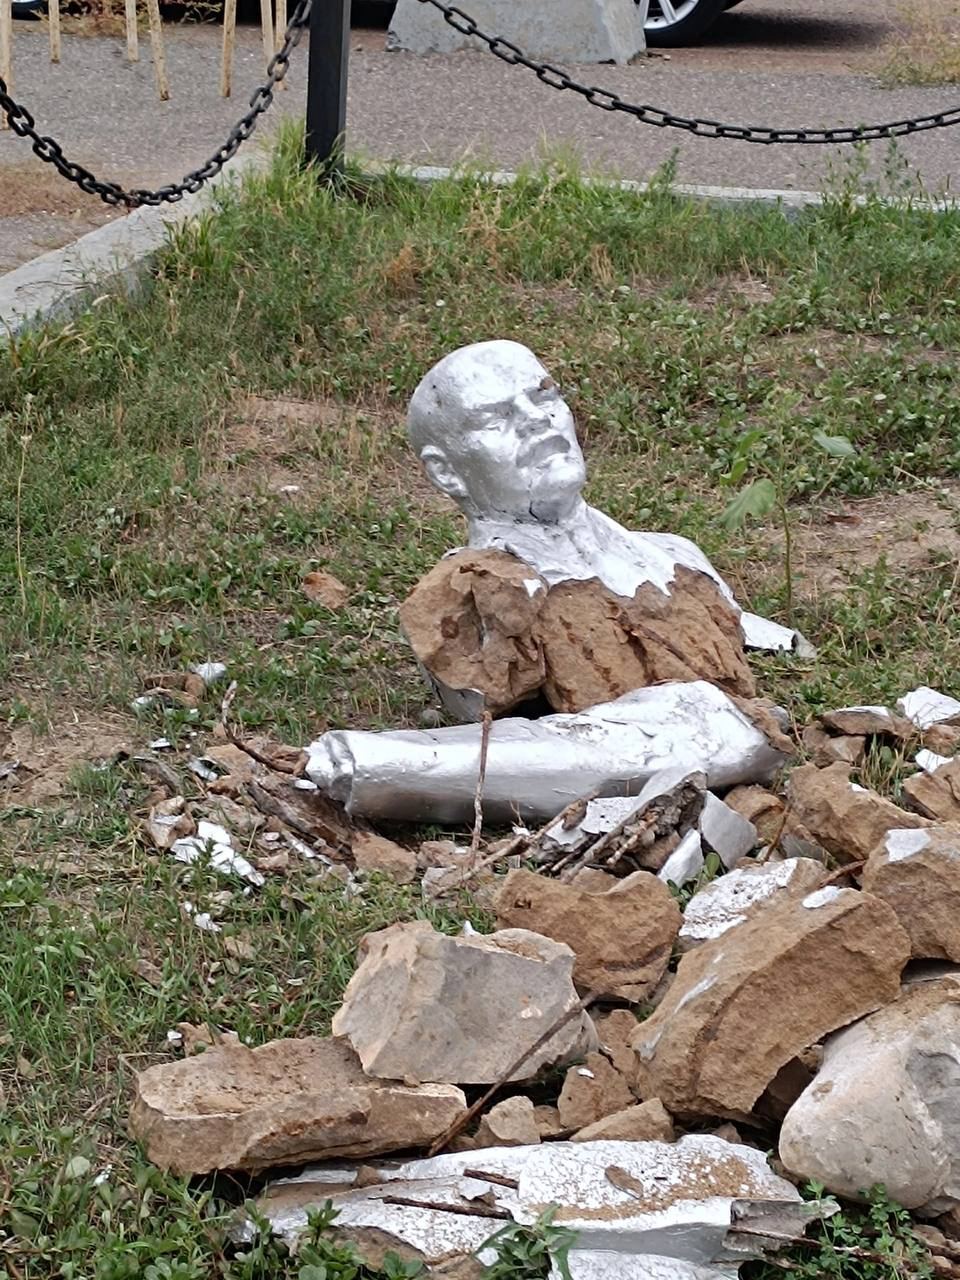 People's decommunization: in Astrakhan, Russia, unknown persons demolished a monument to Lenin. Photo